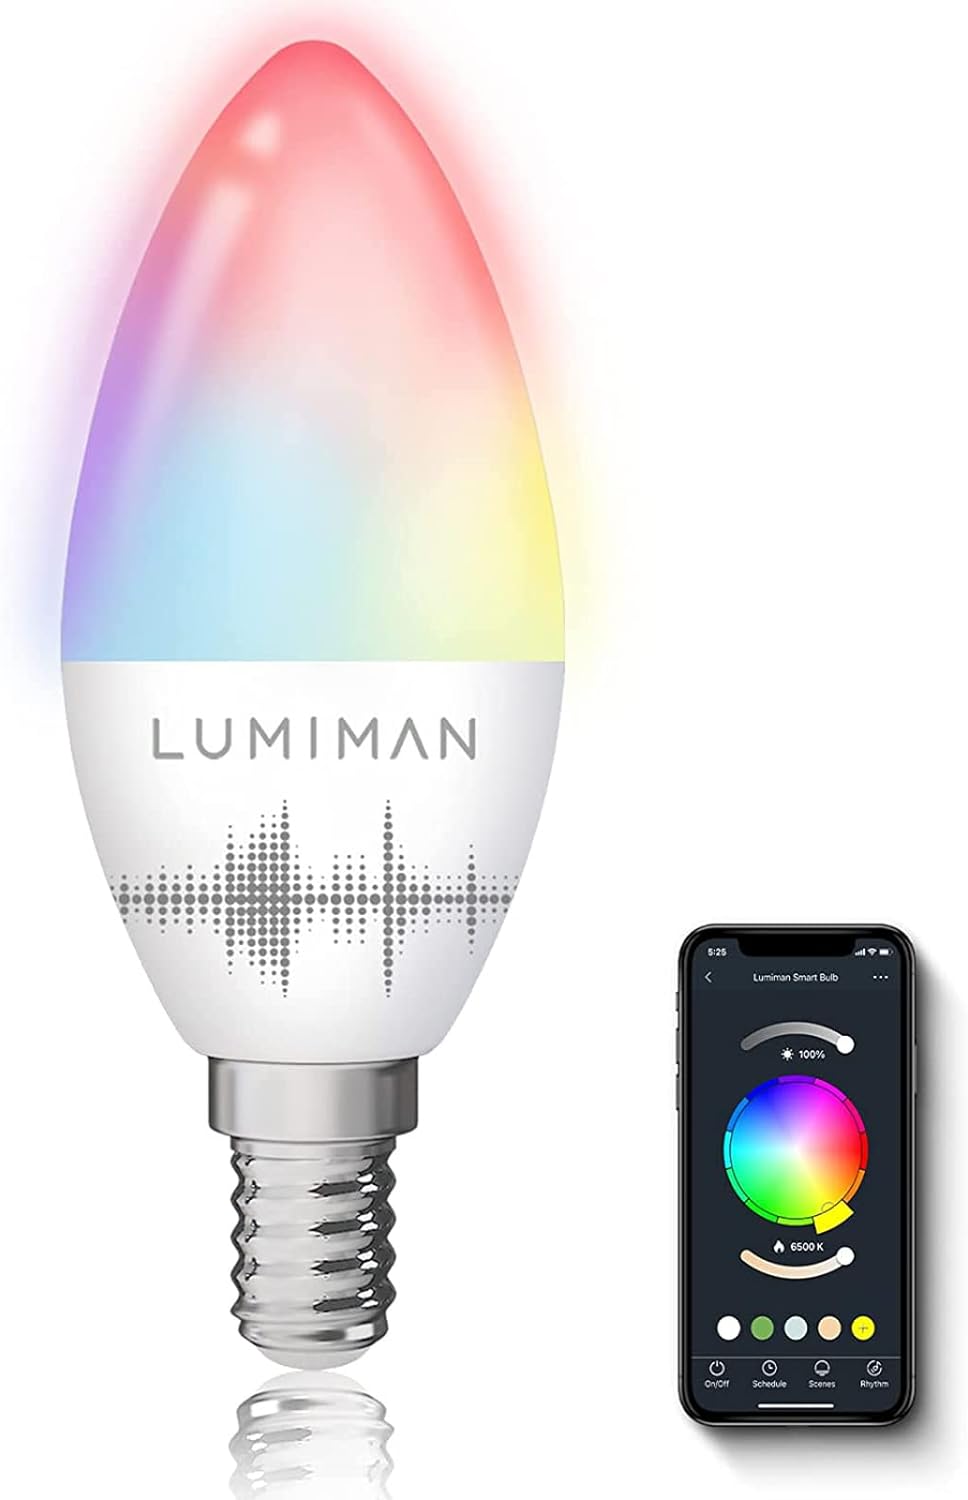 E14 Smart Light Bulb, Alexa Candle Bulb, Colour Changing Chandelier Lights, Dimmable Tunable, RGBCW,4W 400LM, Works with Alexa and Google Assistant, APP Control by Smartphone [Energy Class F]